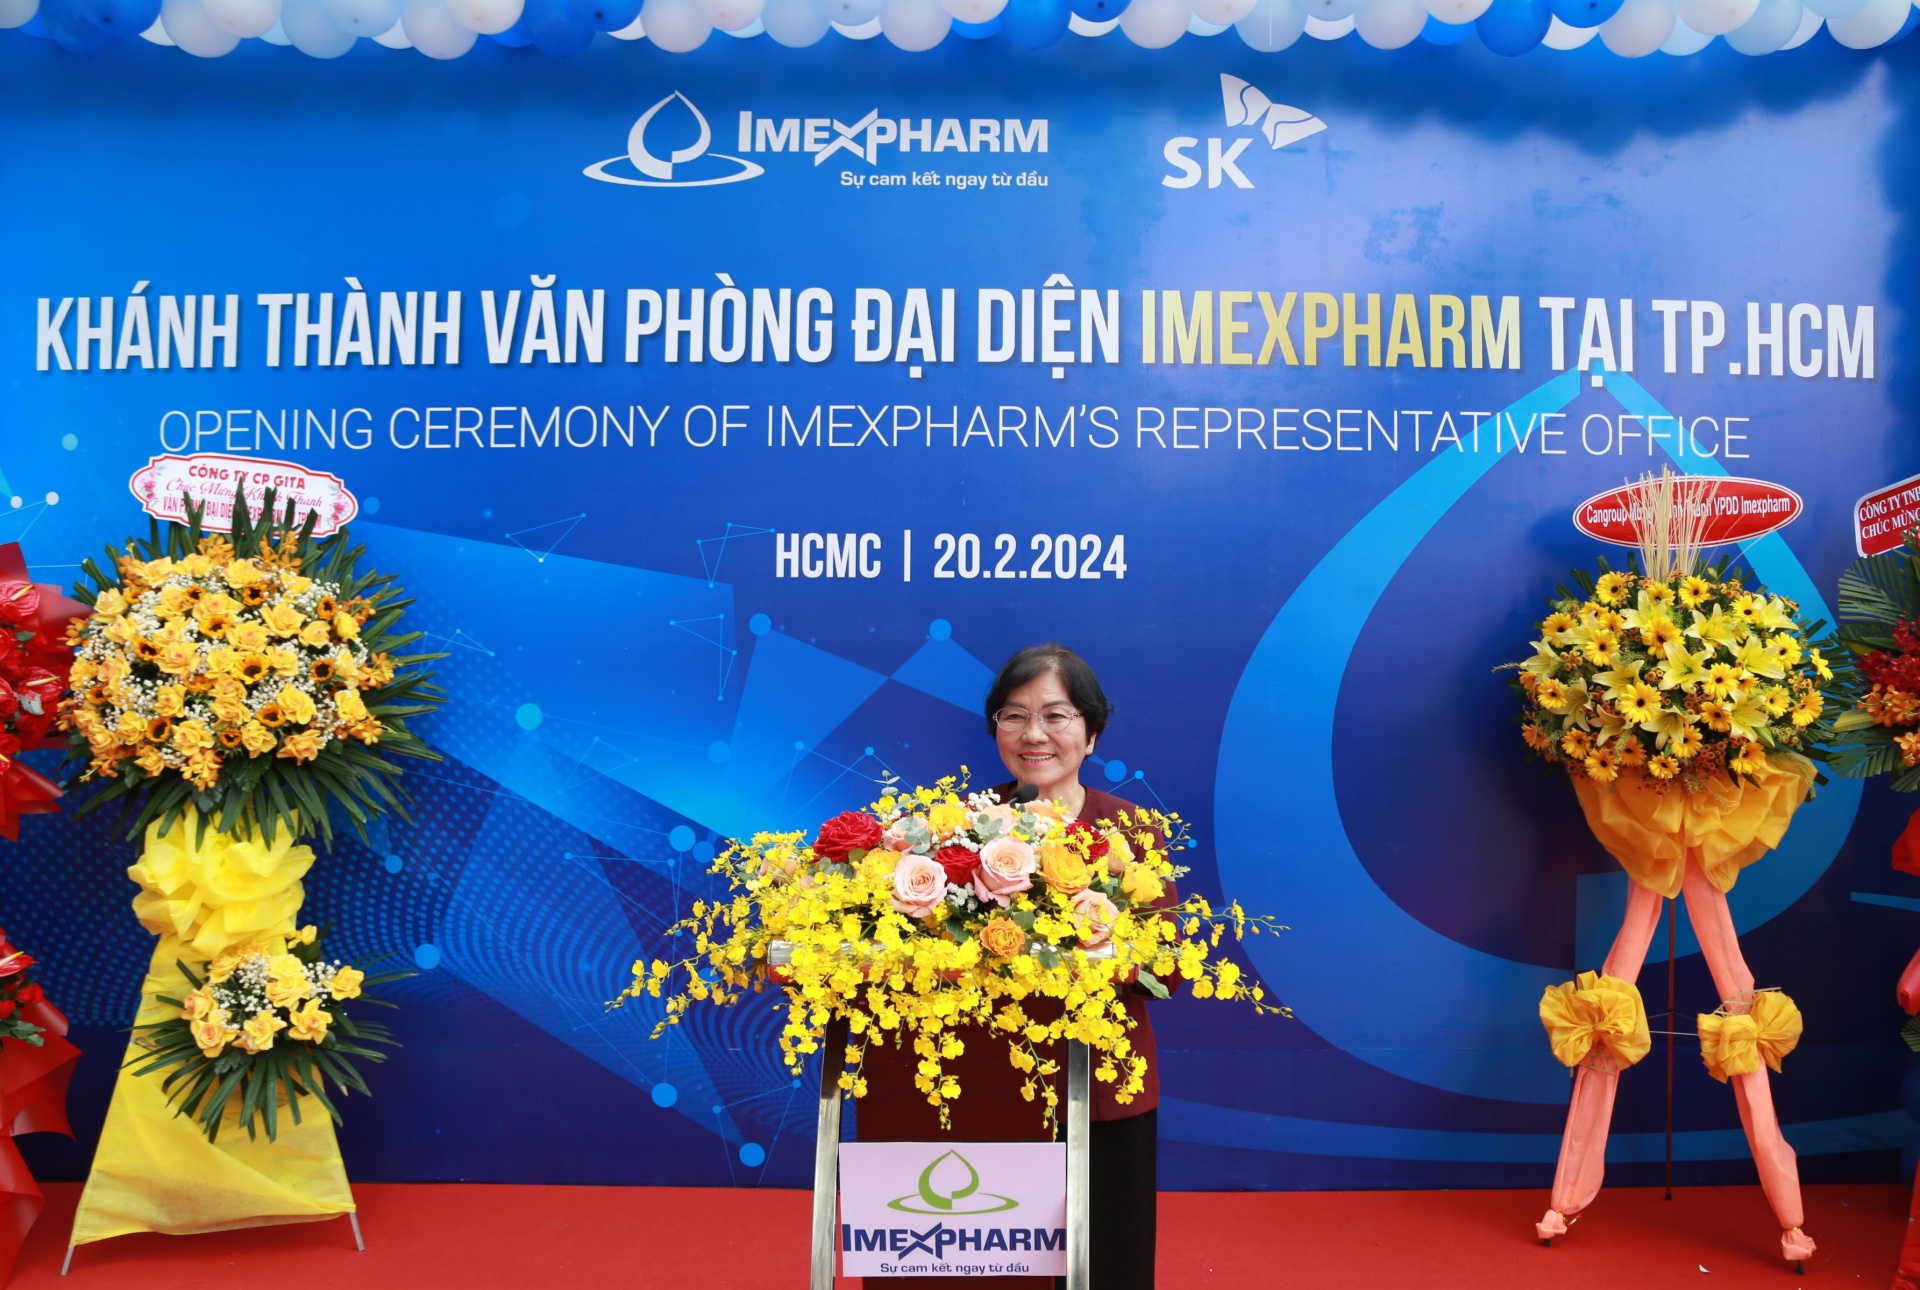 Imexpharm opens new representative office in Ho Chi Minh City